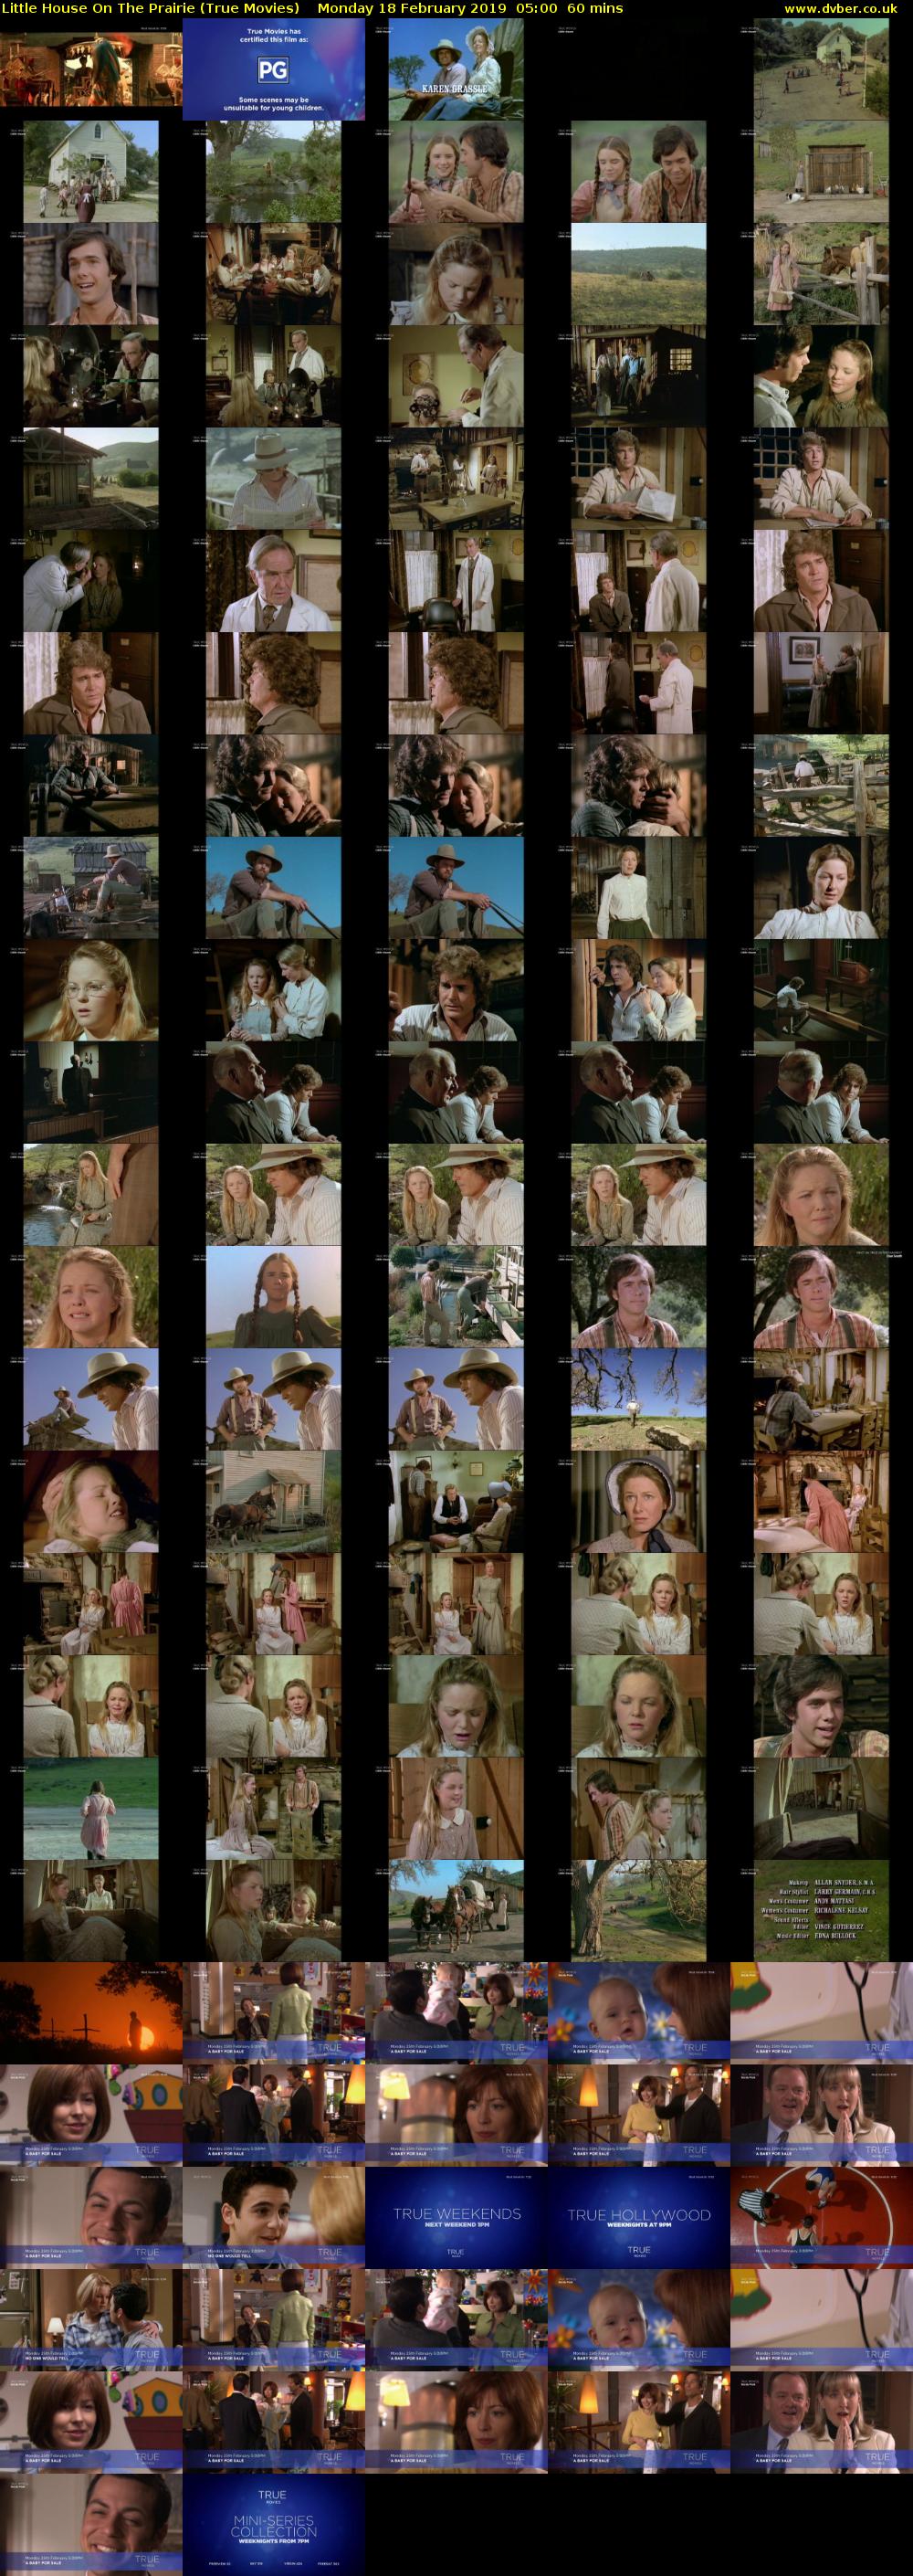 Little House On The Prairie (True Movies) Monday 18 February 2019 05:00 - 06:00